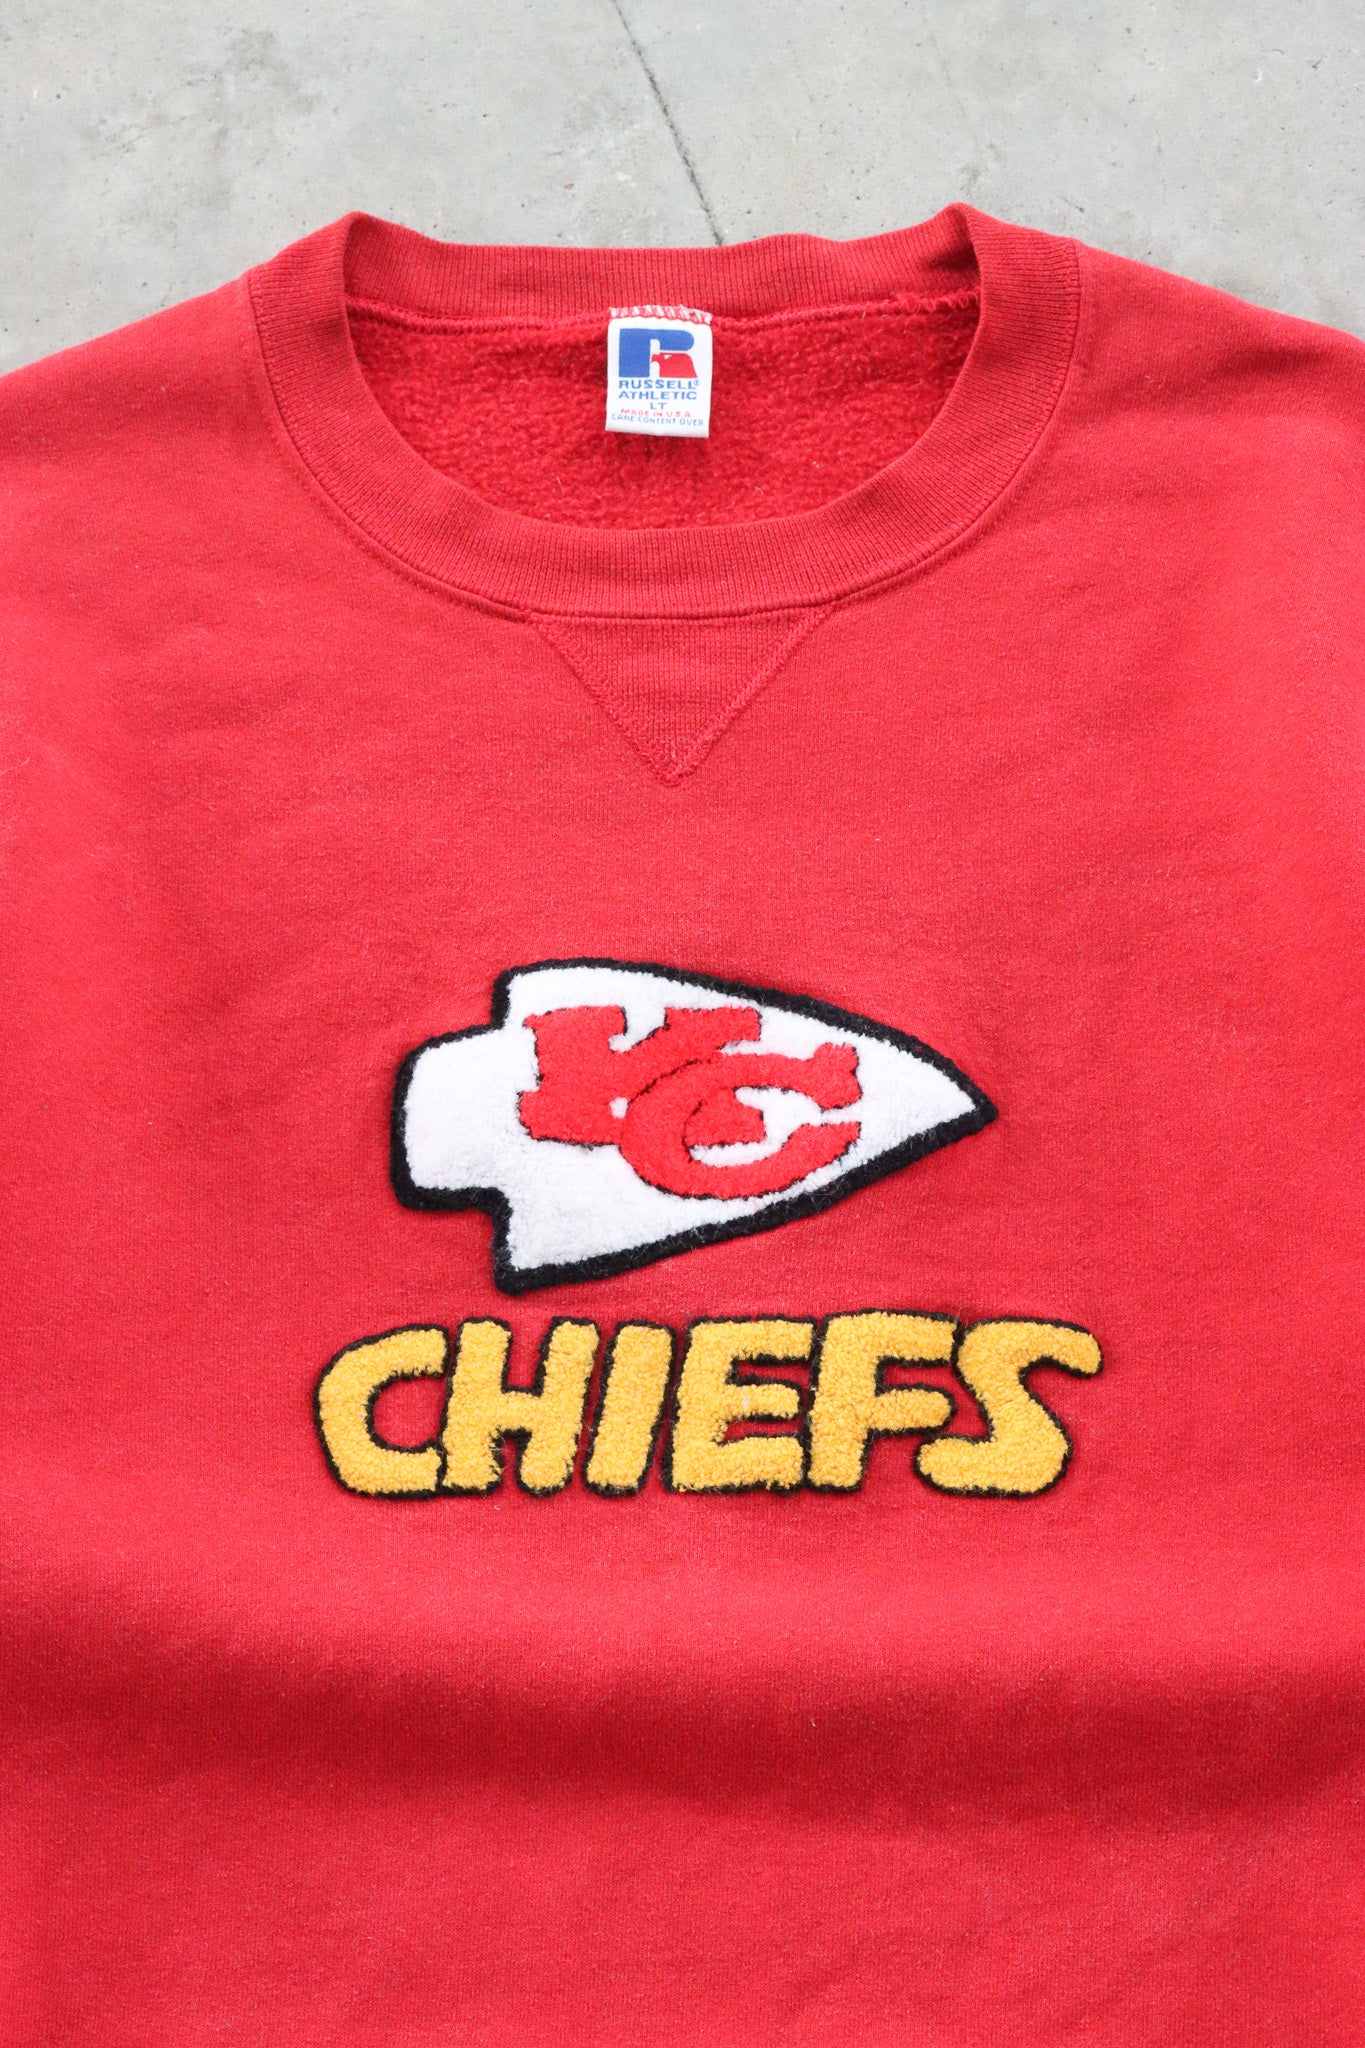 Vintage Chiefs Sweater Large